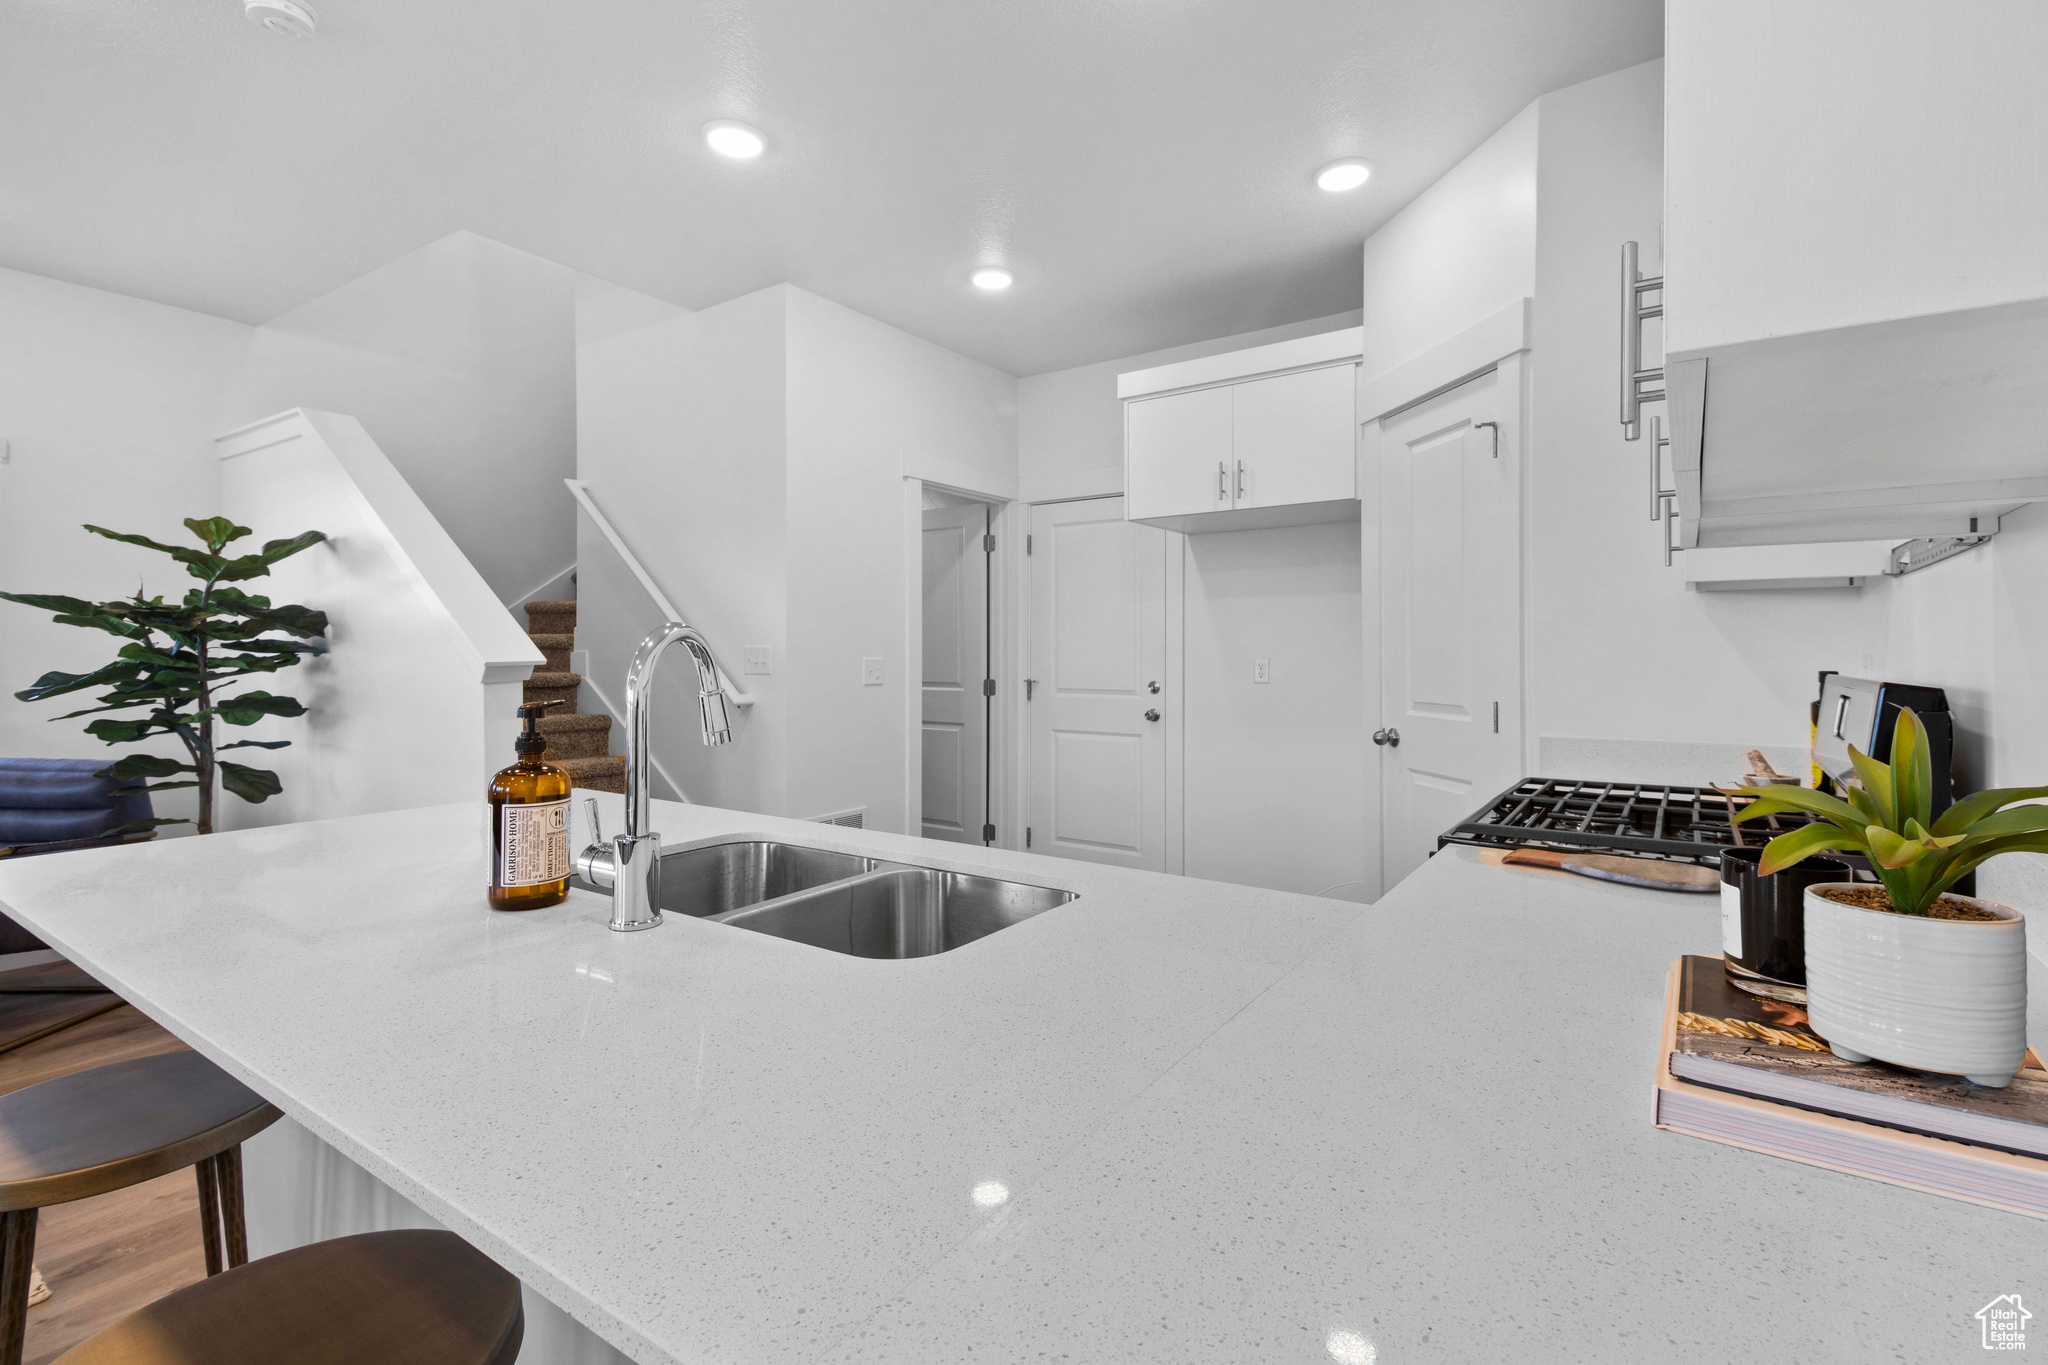 Kitchen with light stone countertops, kitchen peninsula, a kitchen bar, white cabinetry, and sink